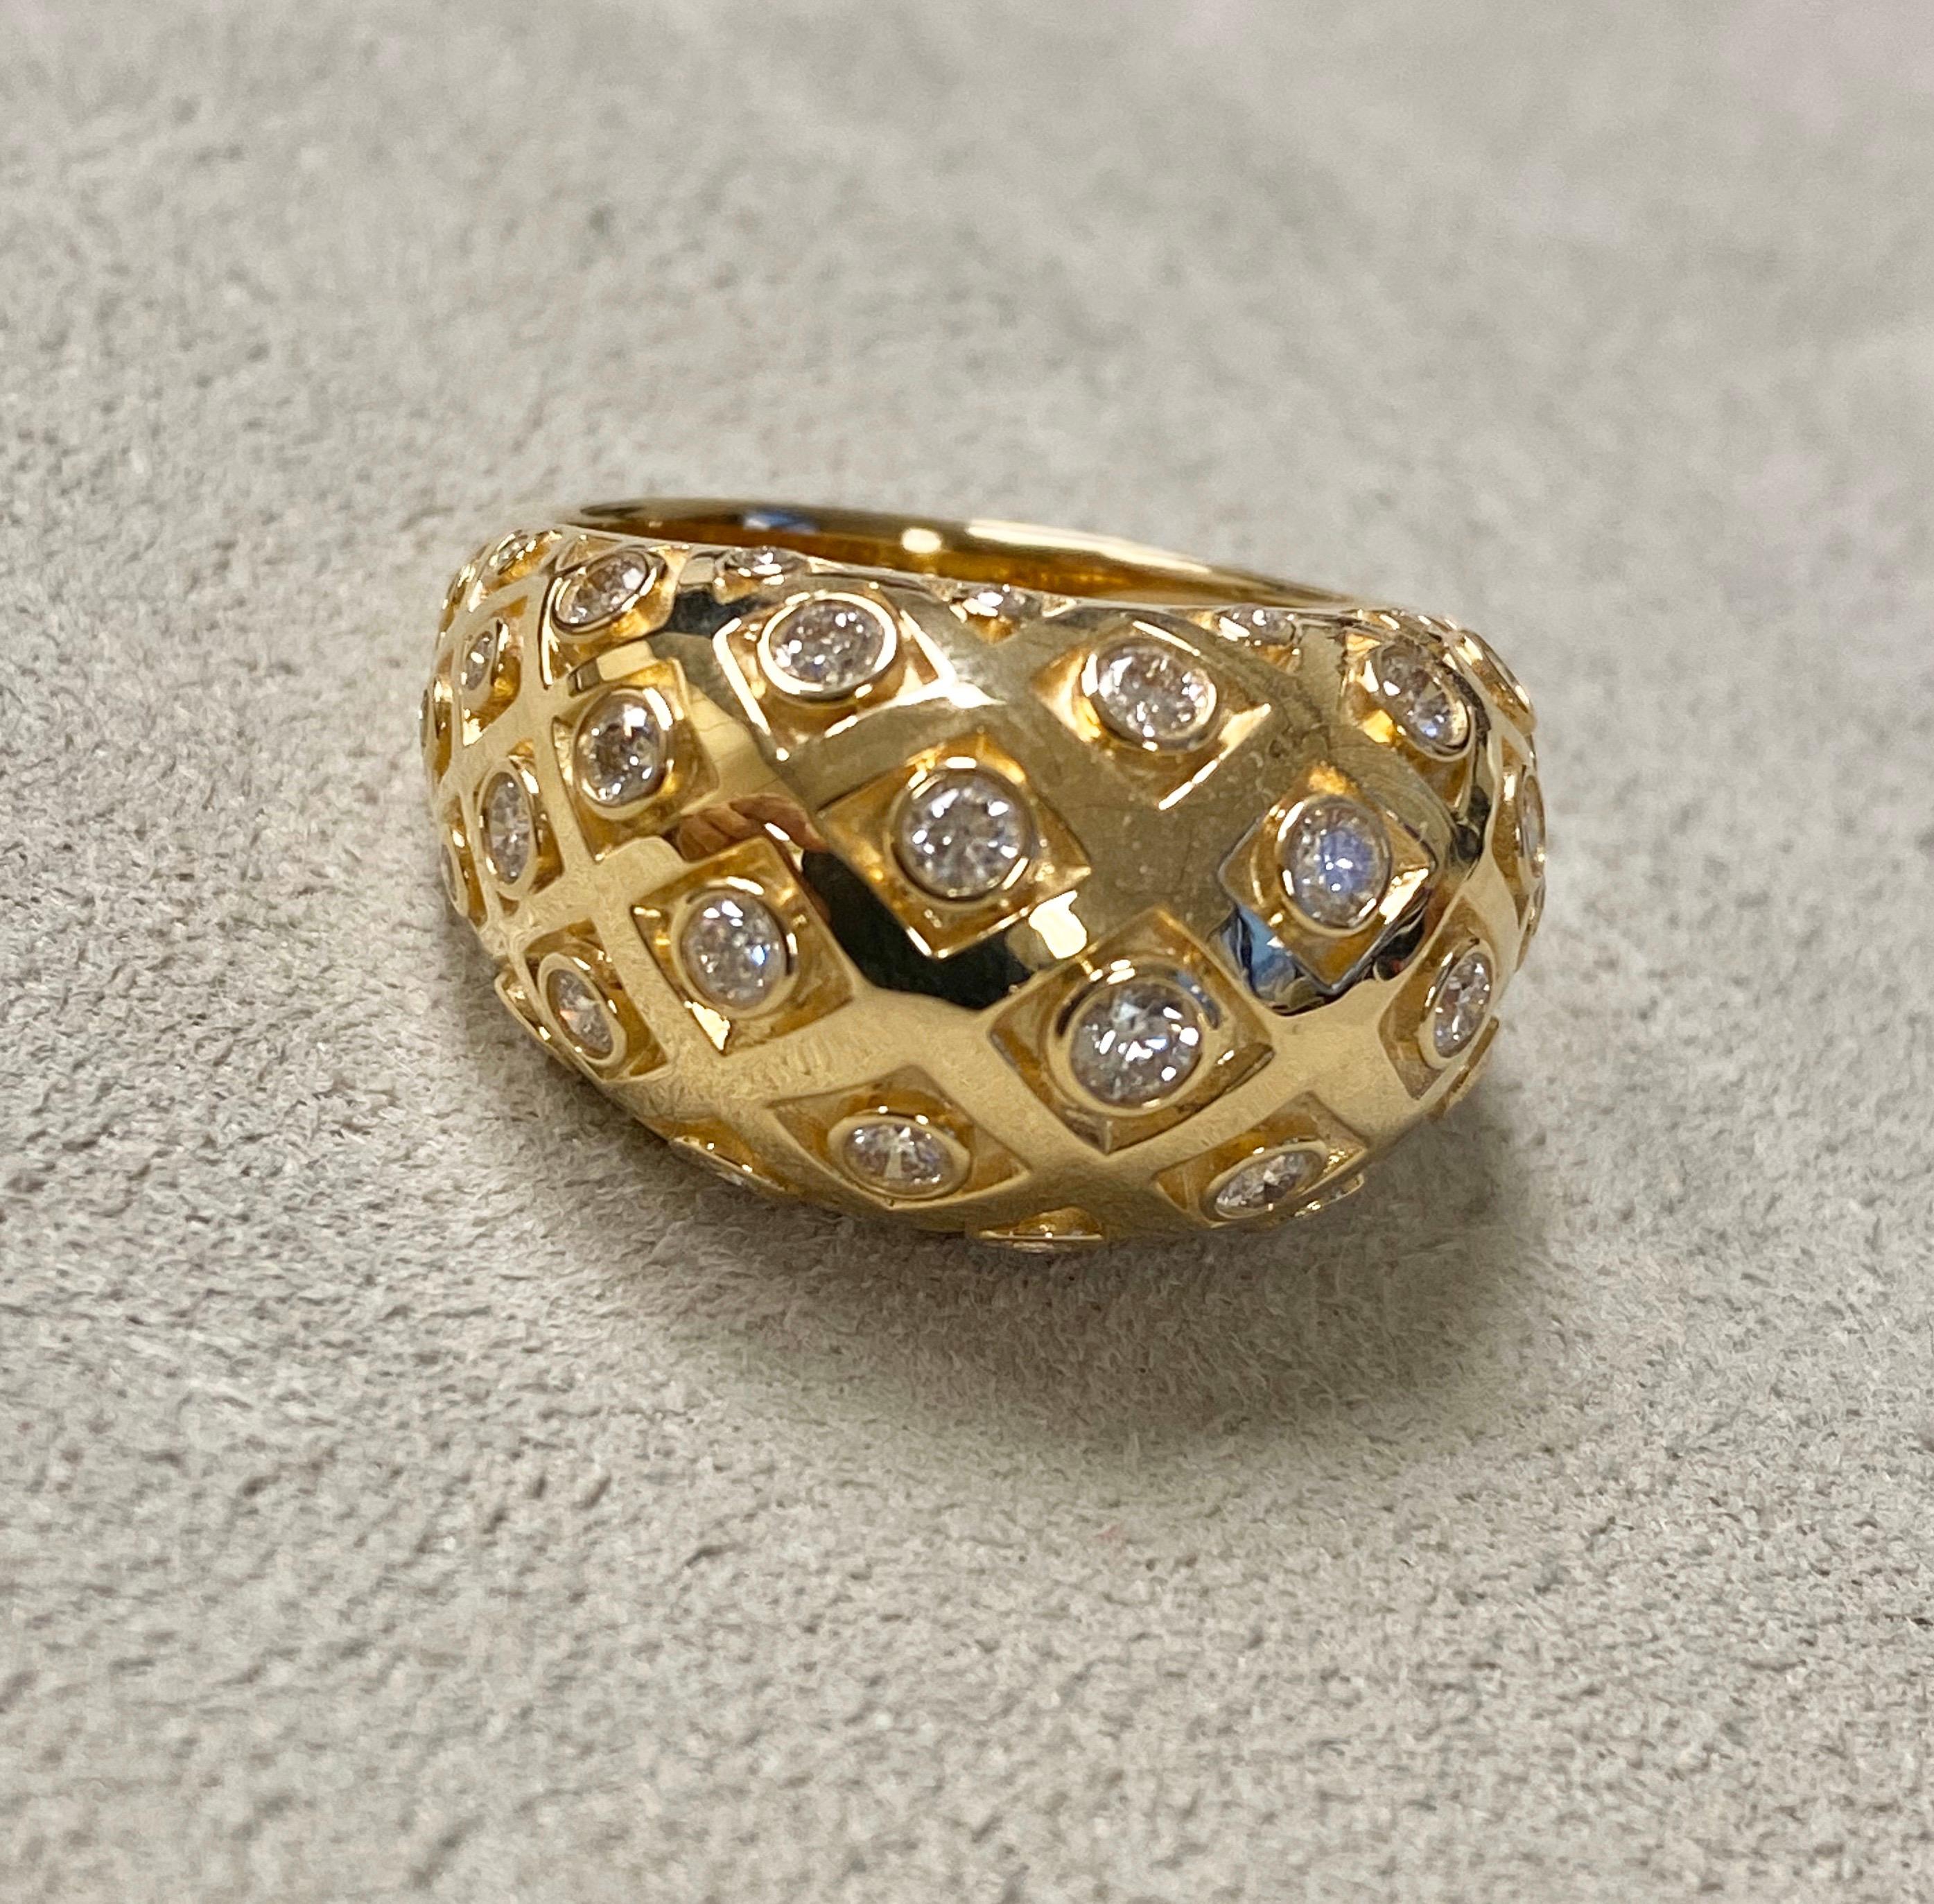 Created in 18 karat yellow gold
Diamonds 0.90 ct approx
Ring size US 6.5, can be sized up or down
Limited edition

Crafted from 18-karat yellow gold, this limited-edition piece features 0.90 carats of sparkling diamonds and is available in US size